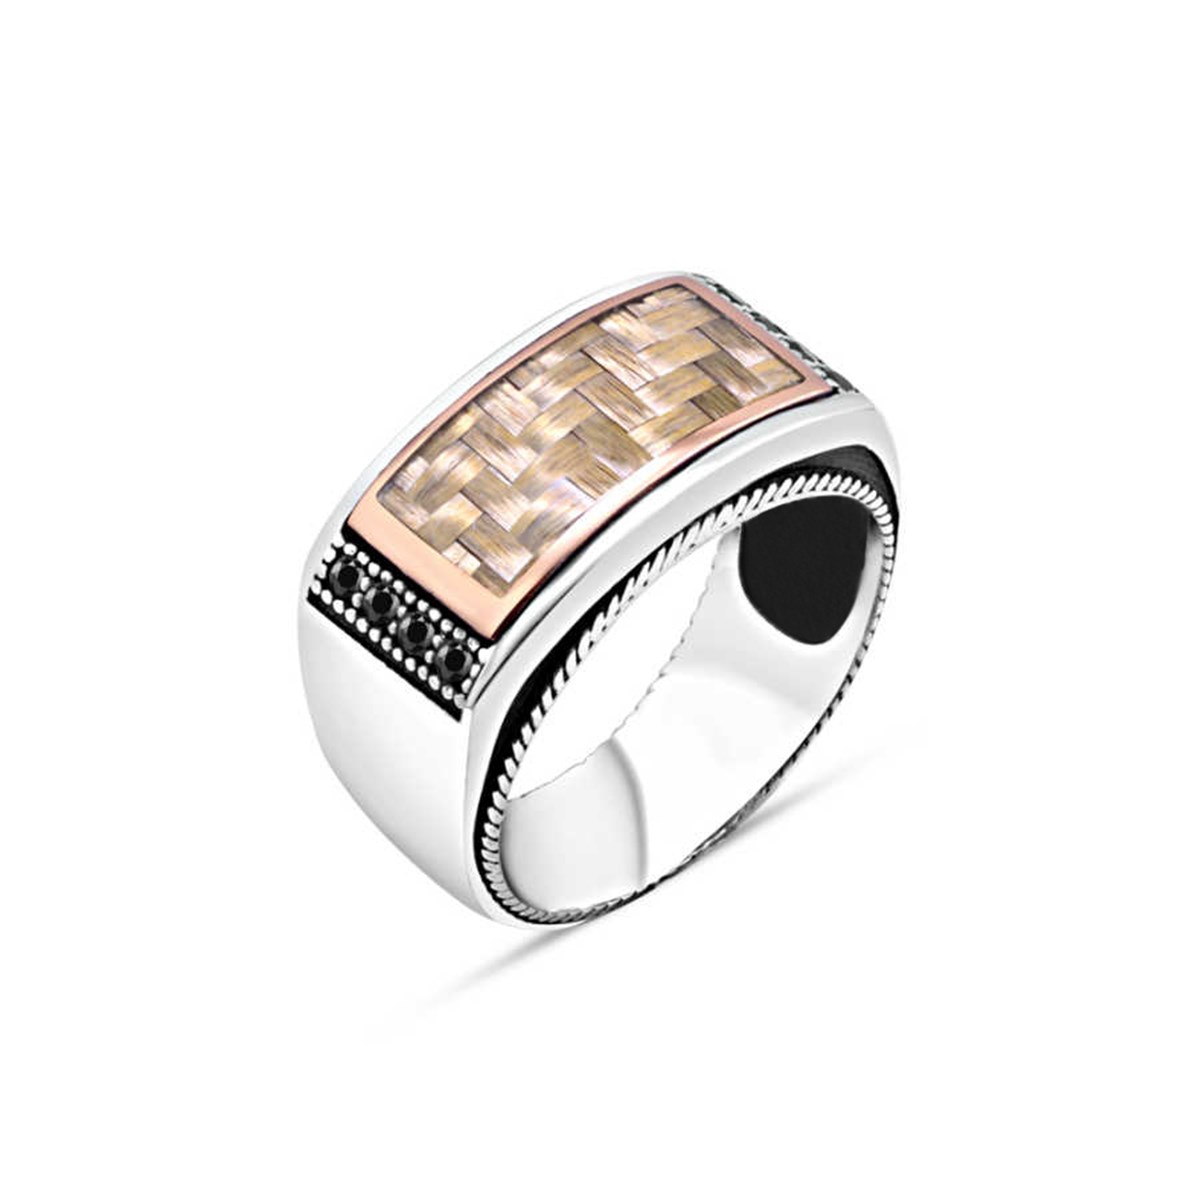 Silver Men's Ring with Black Tiny Zircon Stone on the Carbon Edge